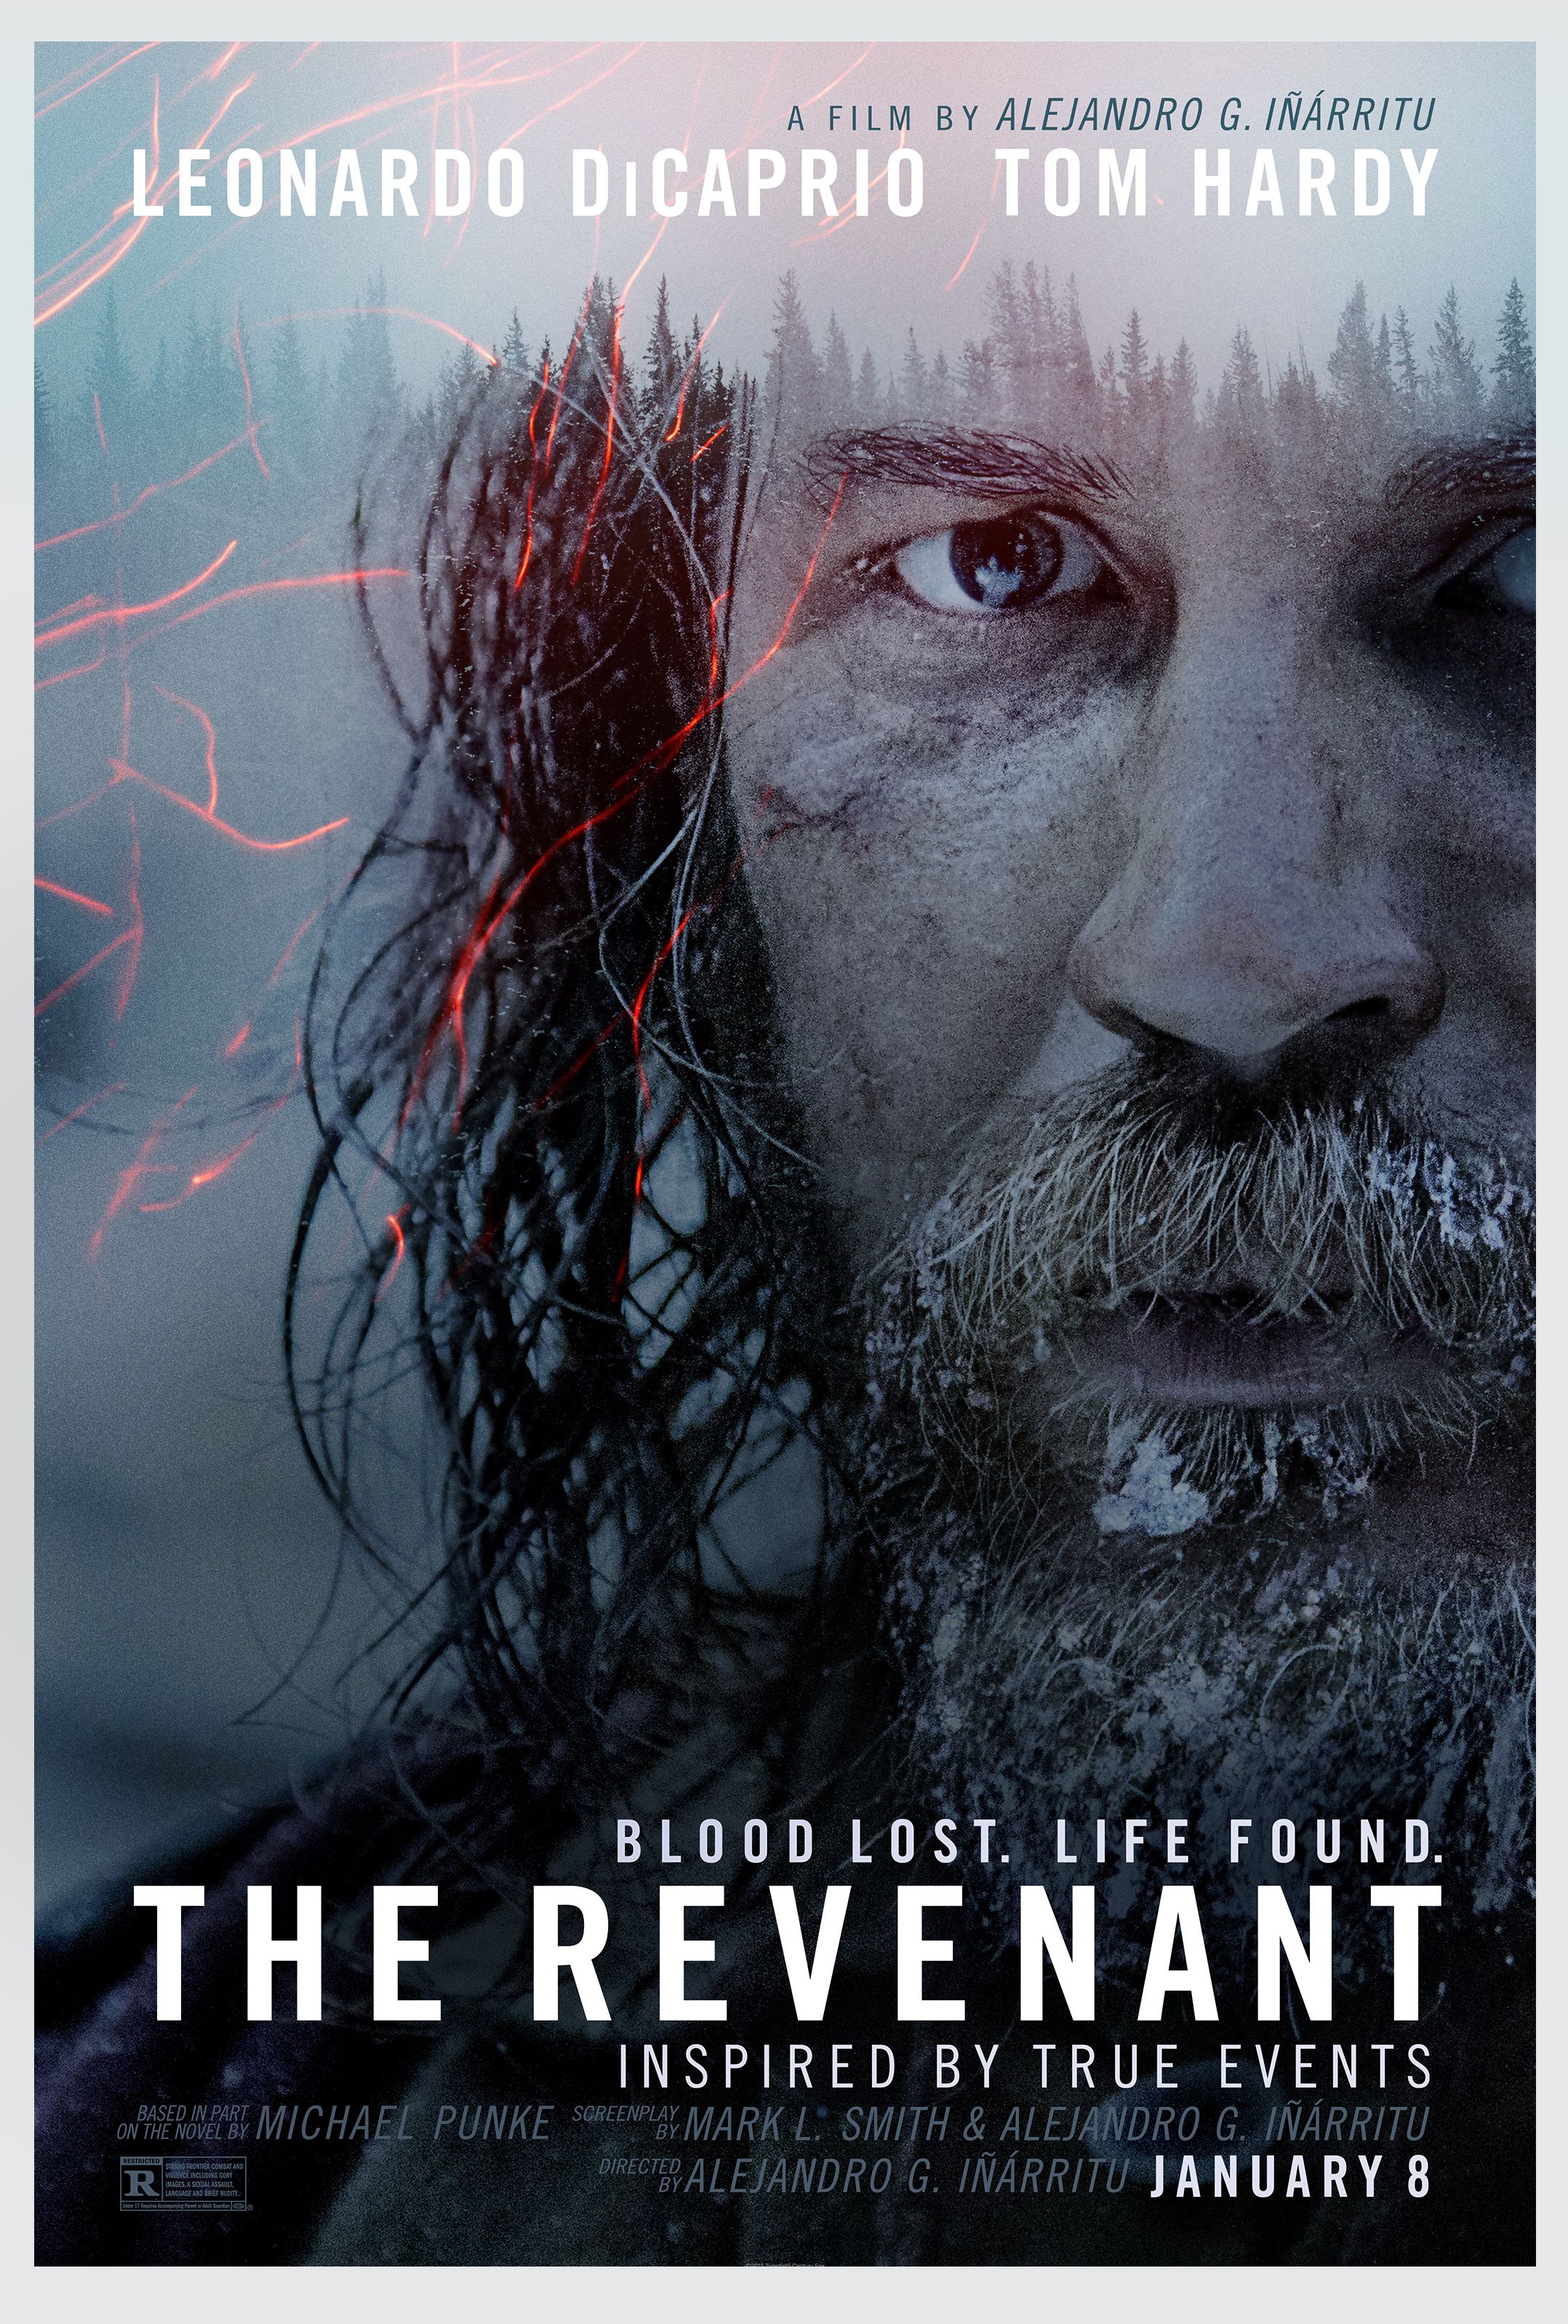 New Poster for The Revenant, Featuring Tom Hardy